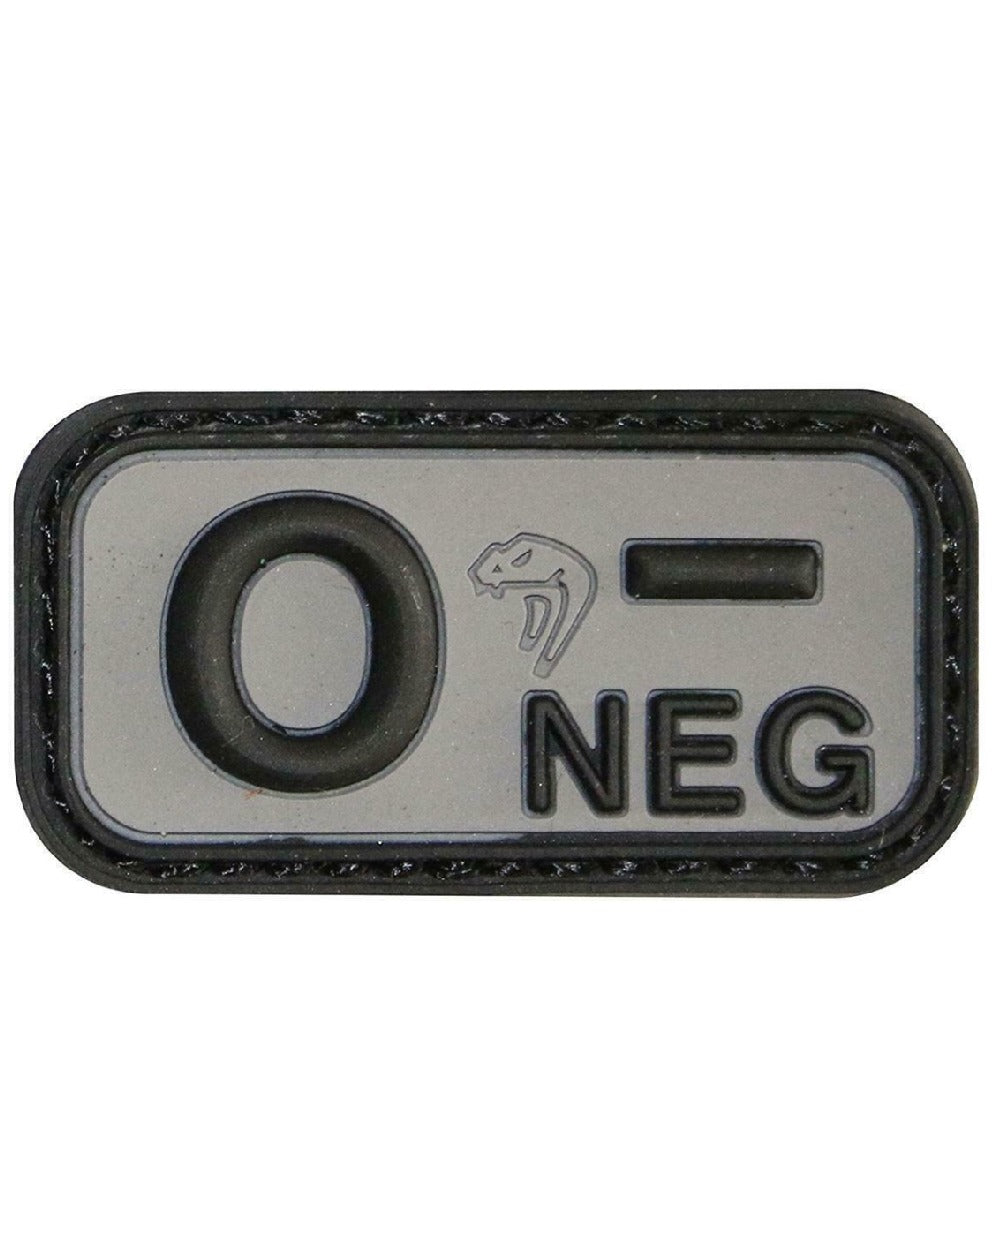 Viper Blood Group Rubber Patch O Neg in Black 